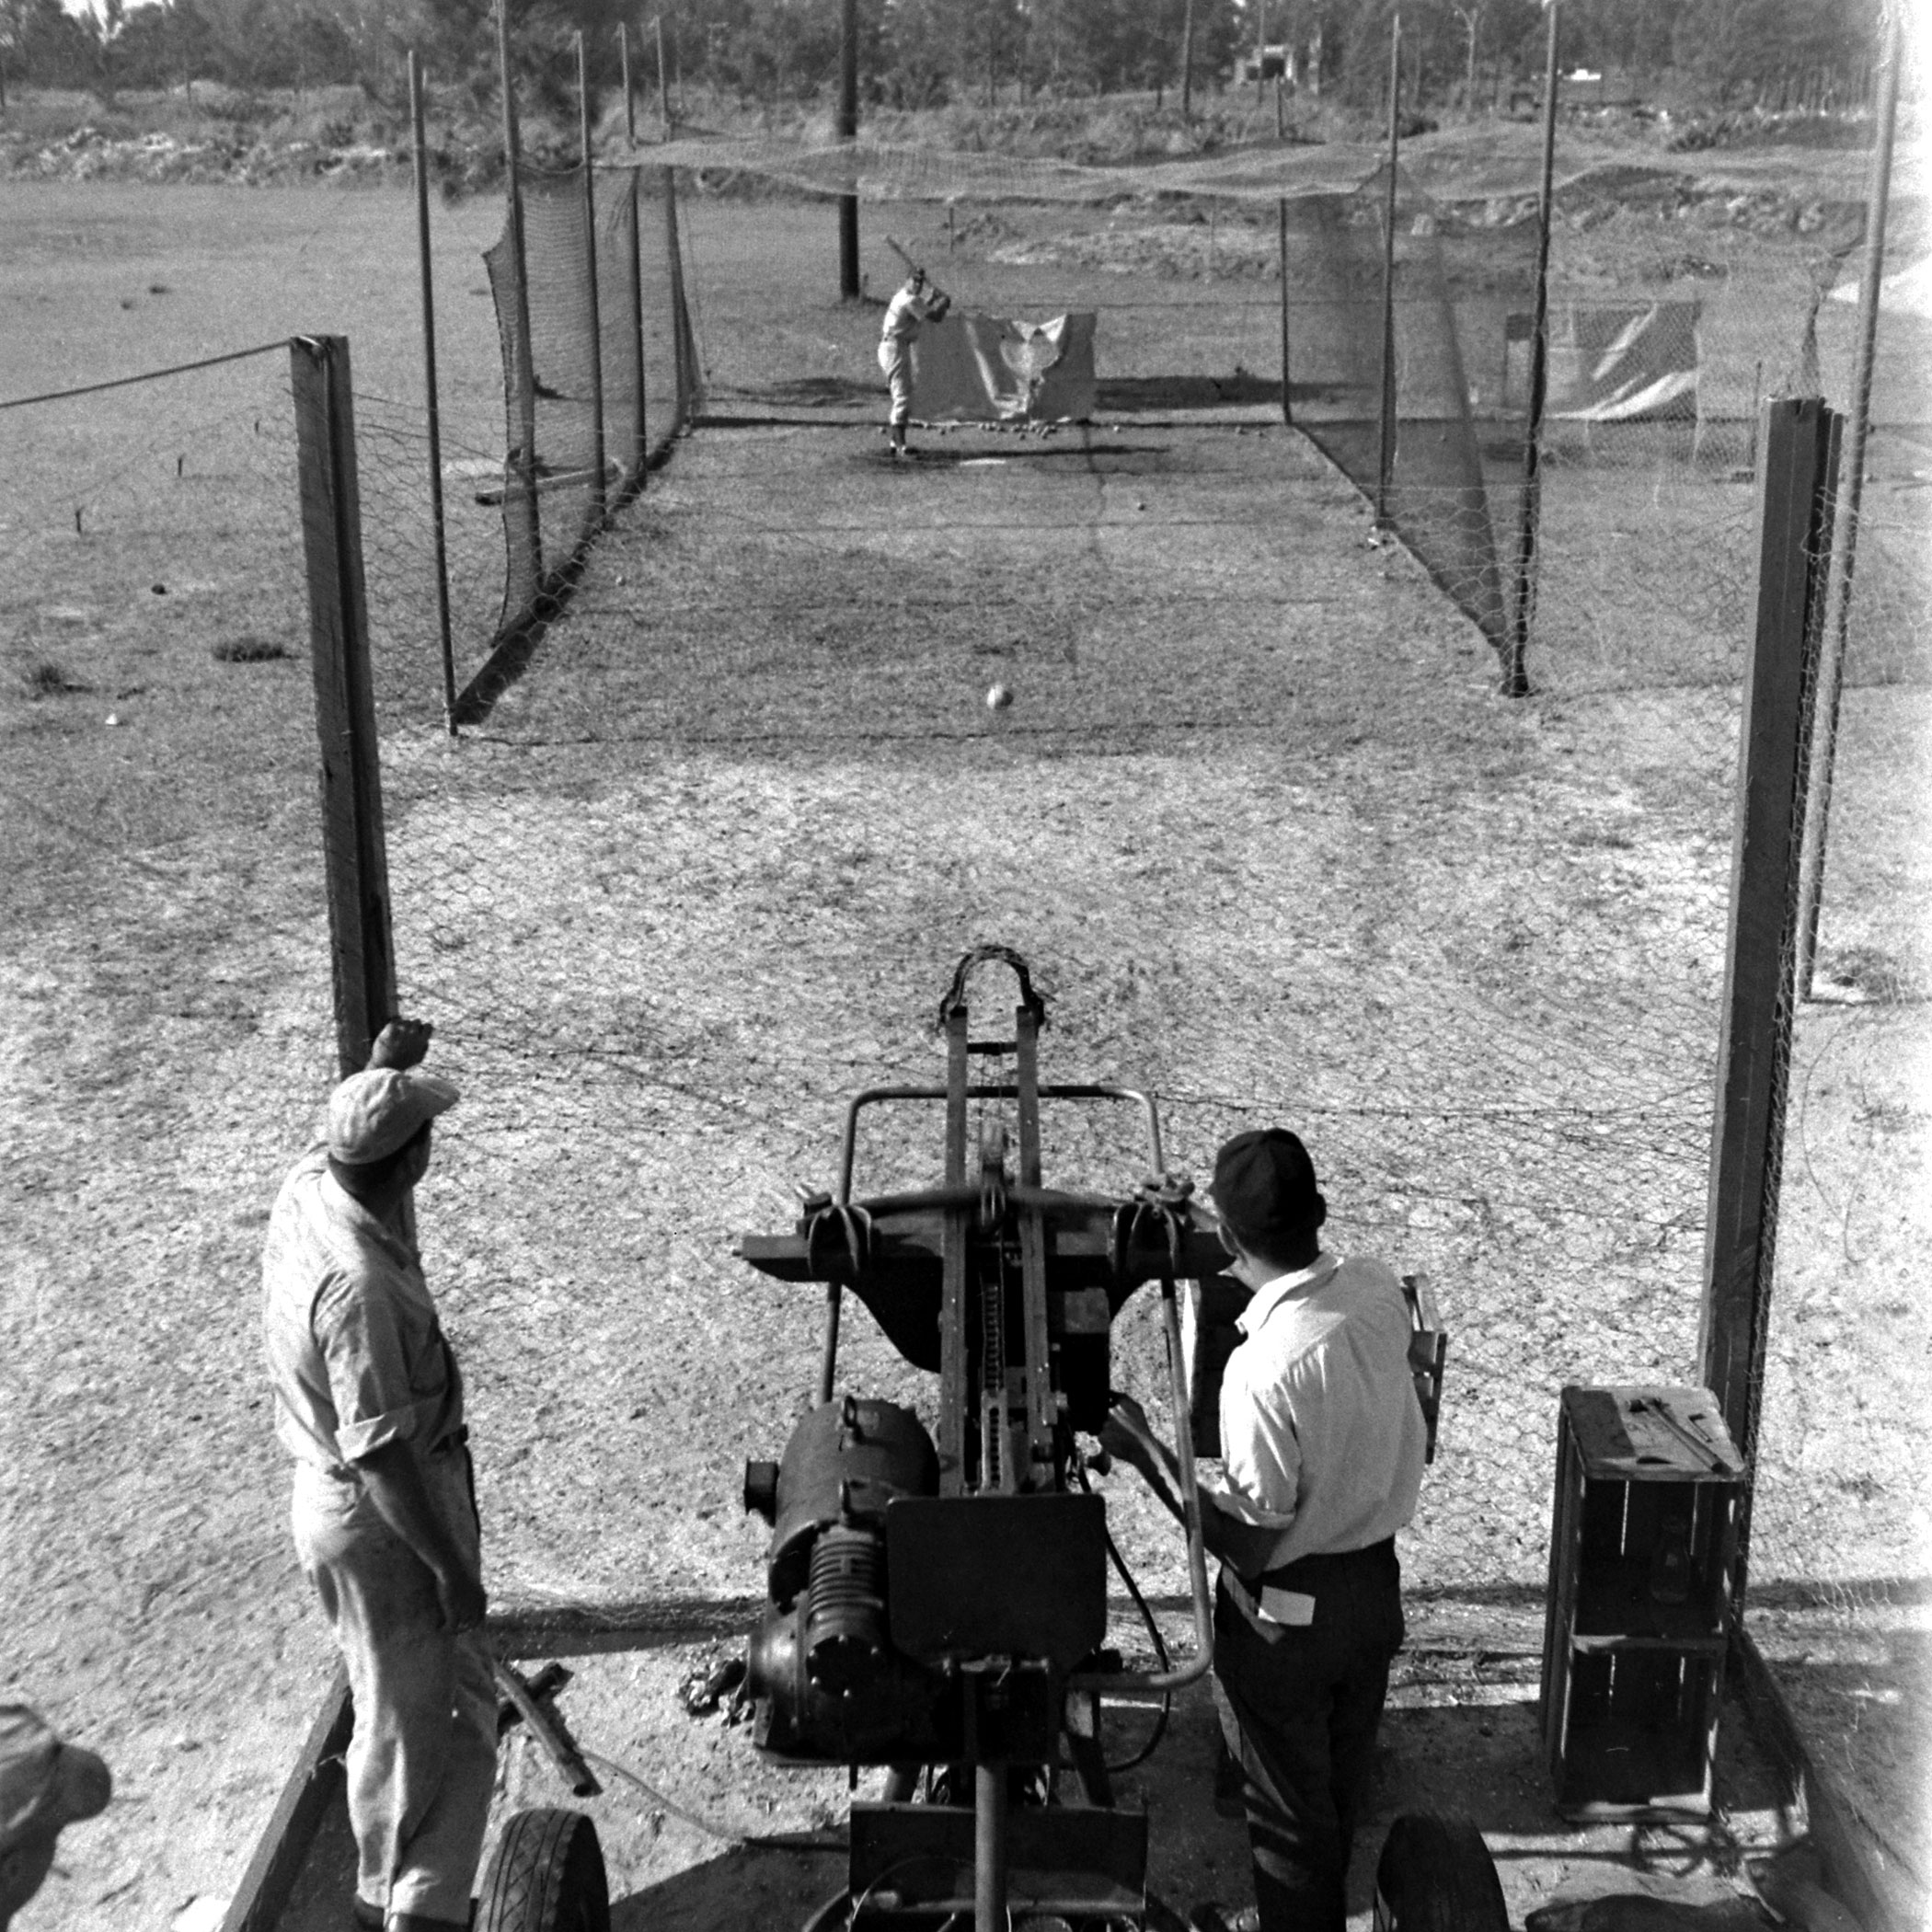 Batting practice in the cage, Dodgertown, Fla., 1948.